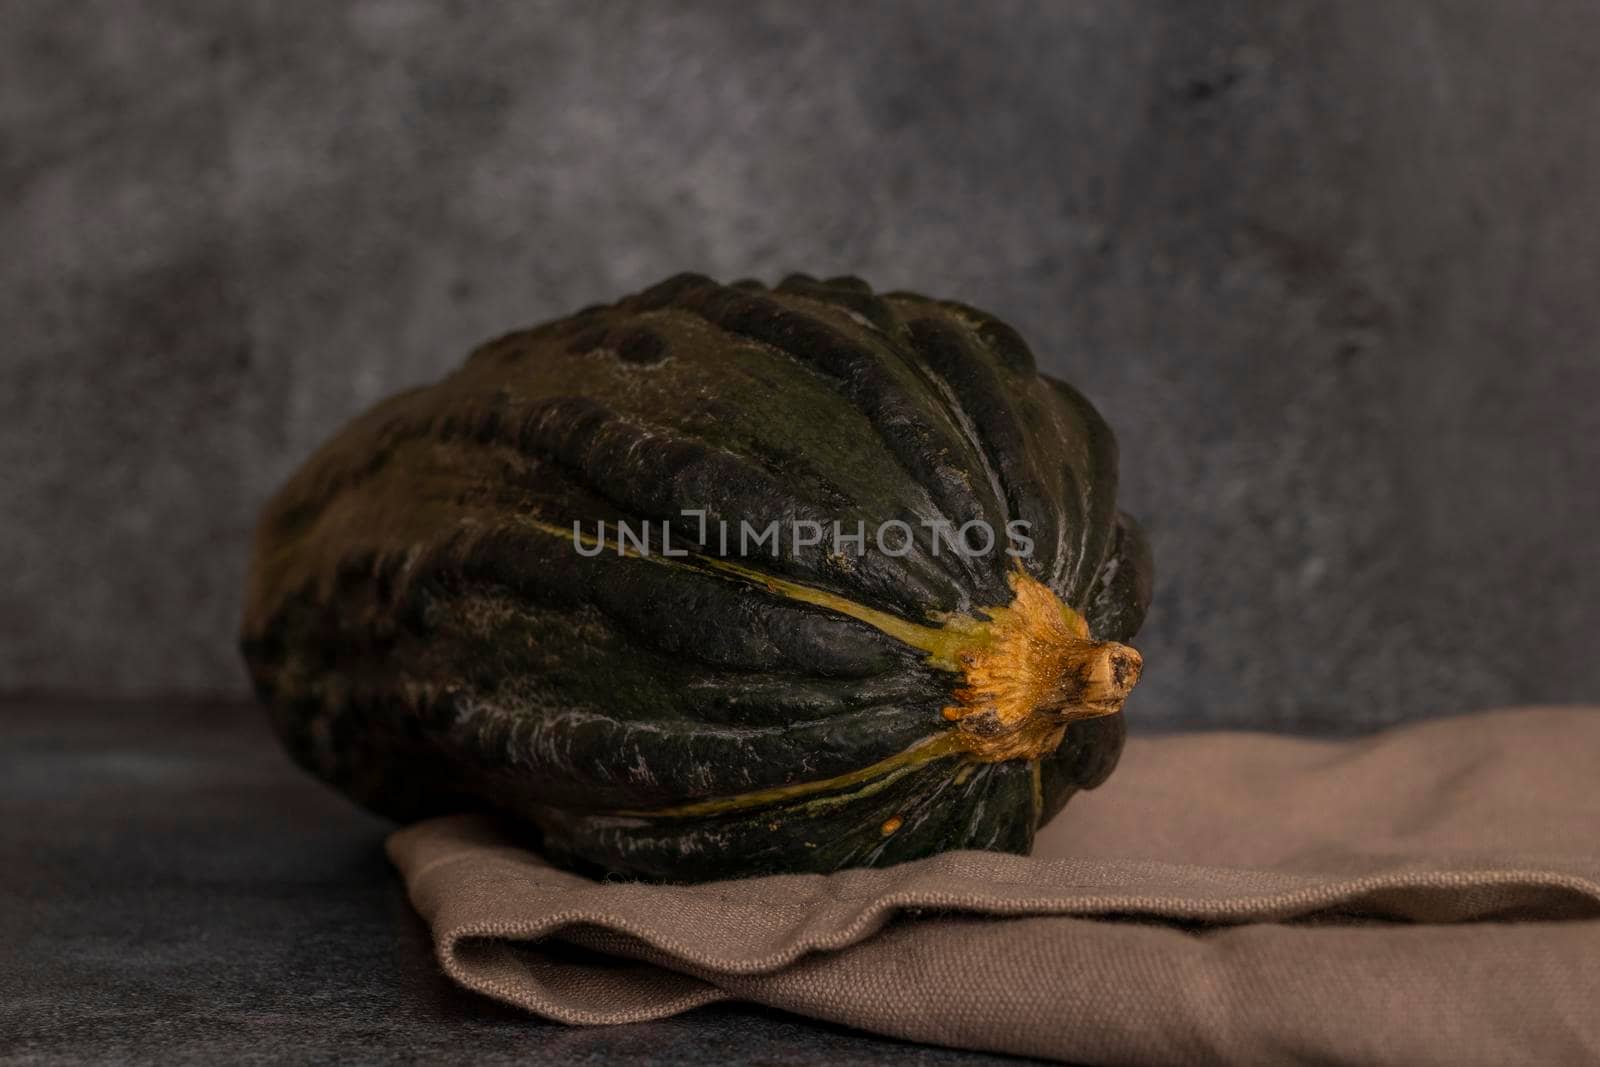 Typical pumpkin from Peru, also called as: Zapallo Loche or Lambayeque. by eagg13